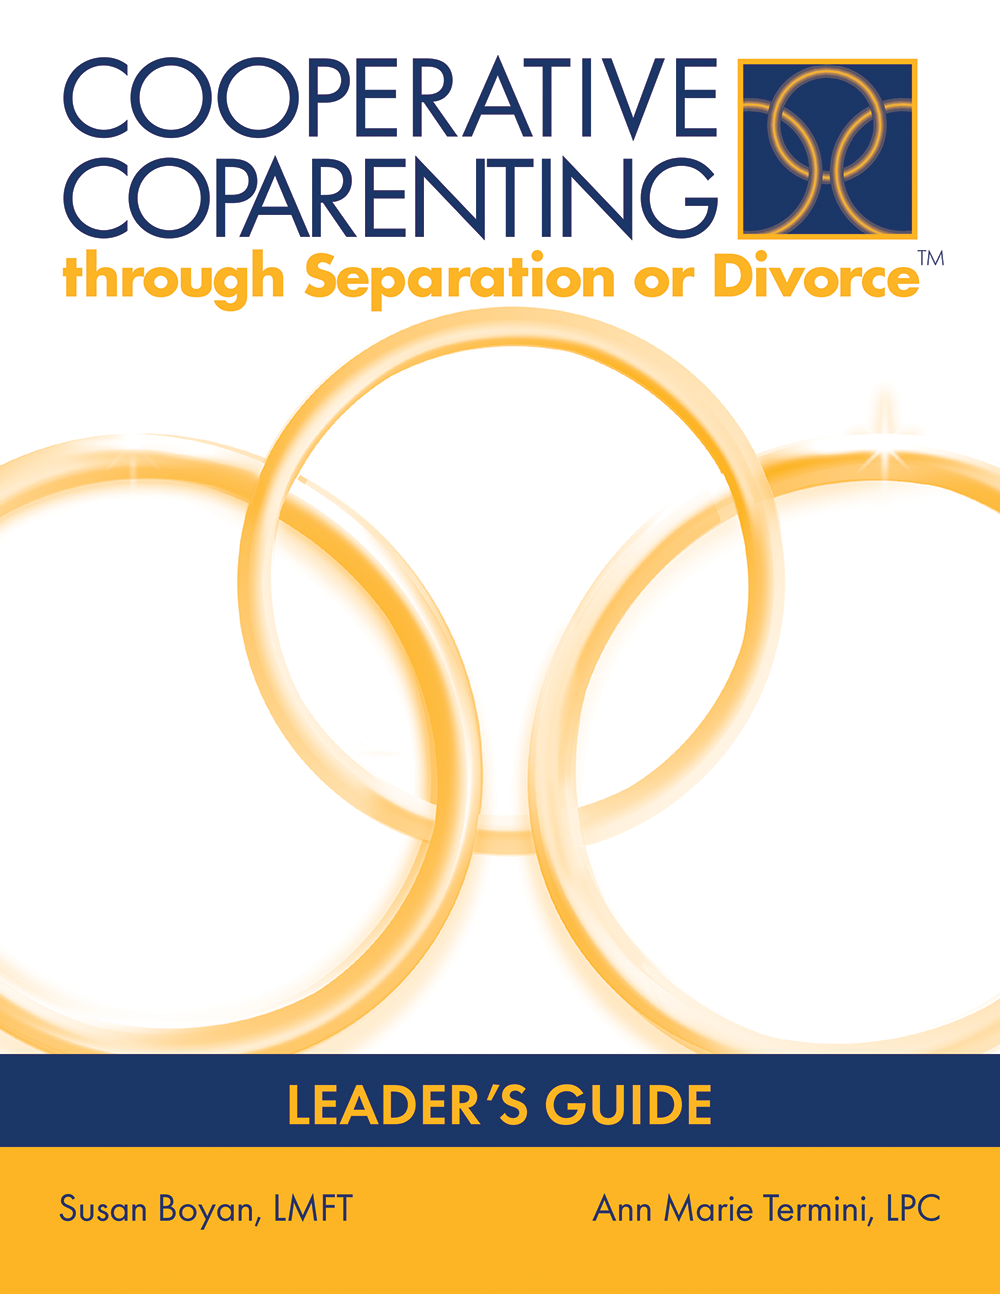 Cooperative Coparenting through Separation or Divorce Leader's Guide